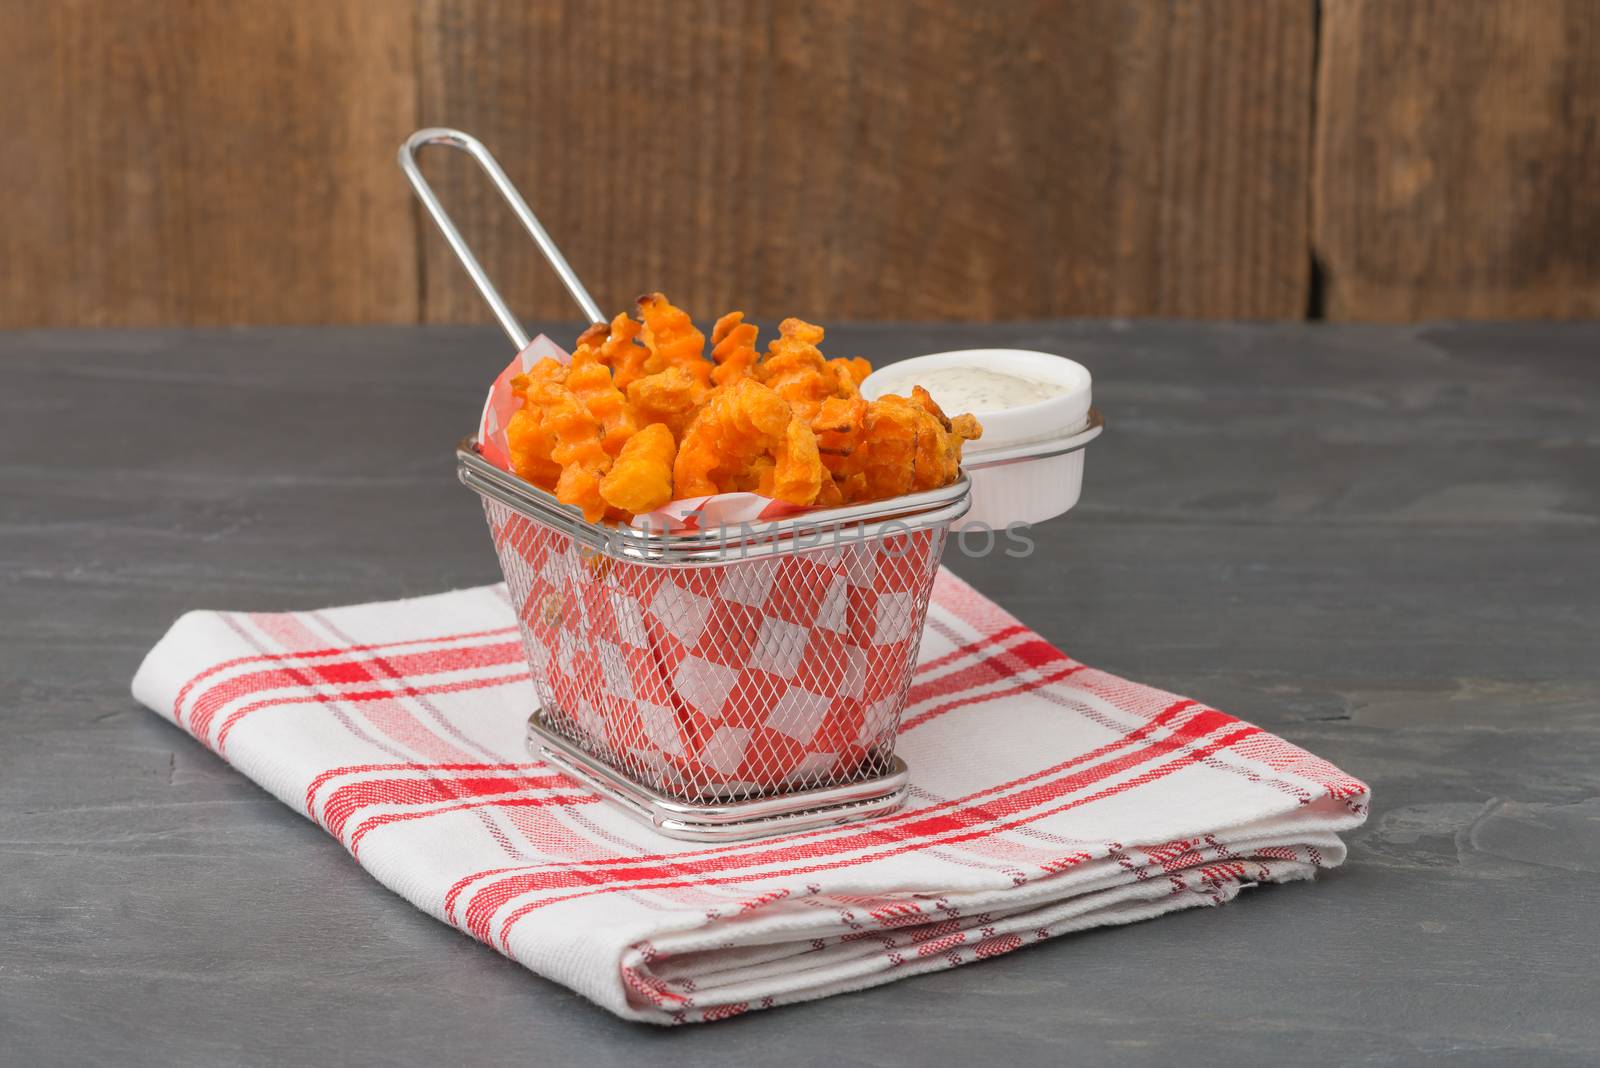 Basket of deep fried sweet potatoes with a buttermilk dill dipping sauce.